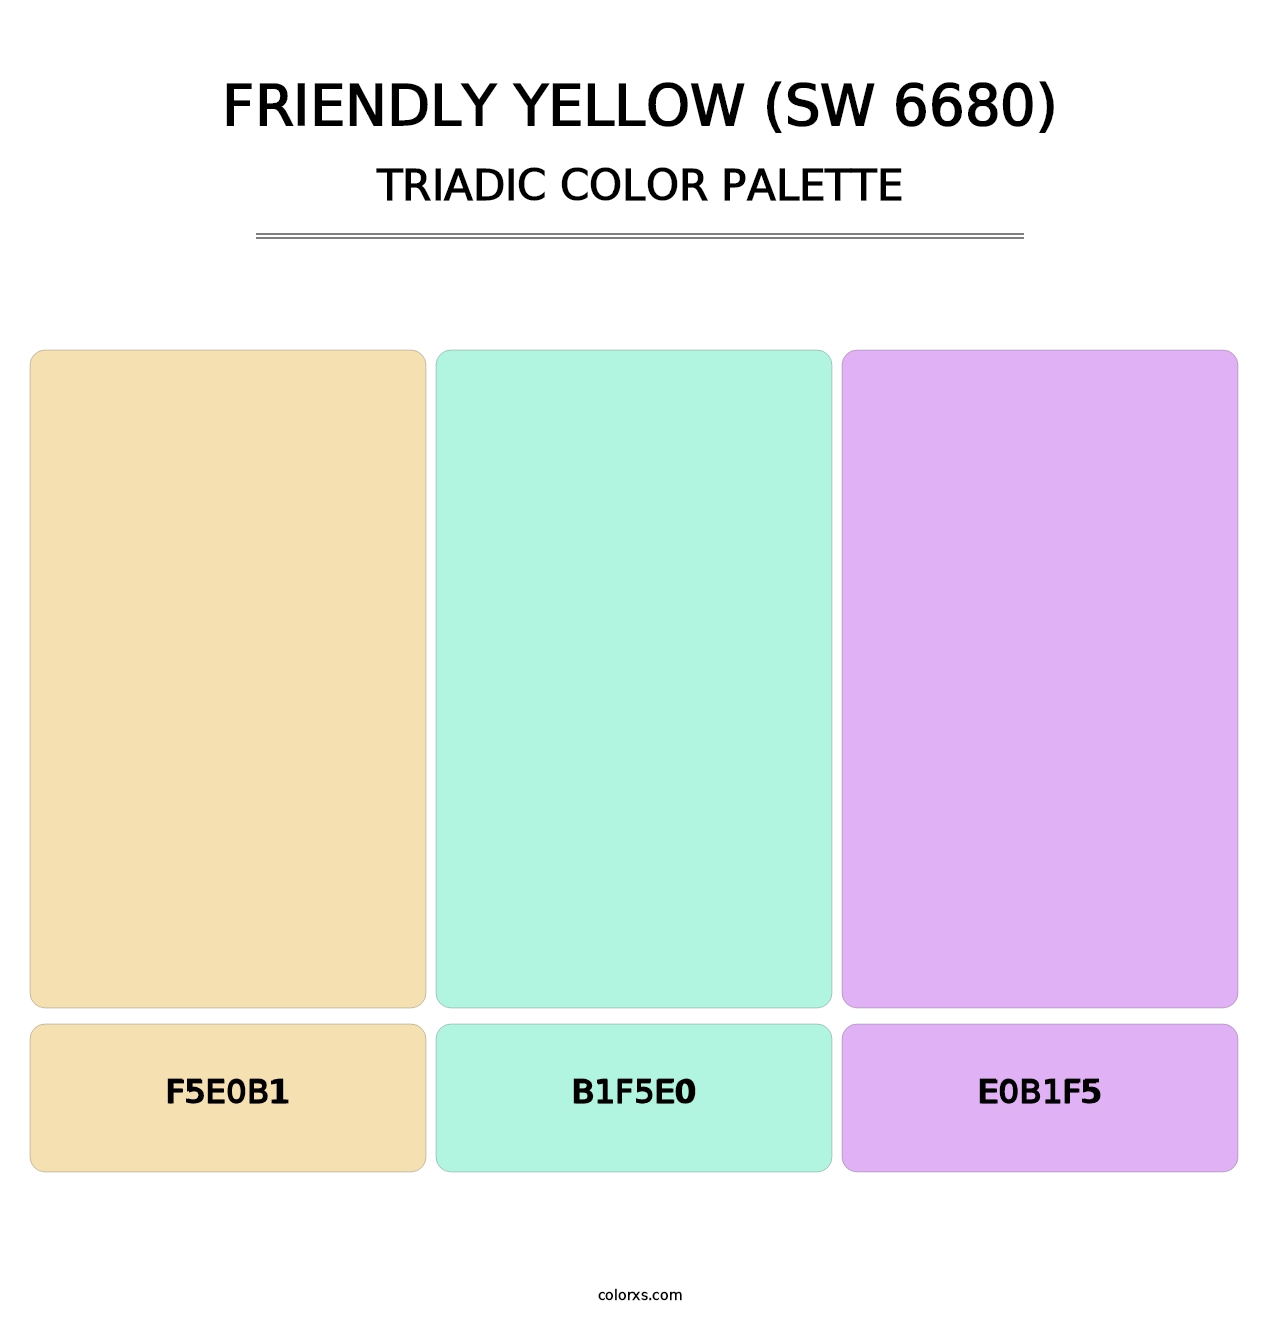 Friendly Yellow (SW 6680) - Triadic Color Palette